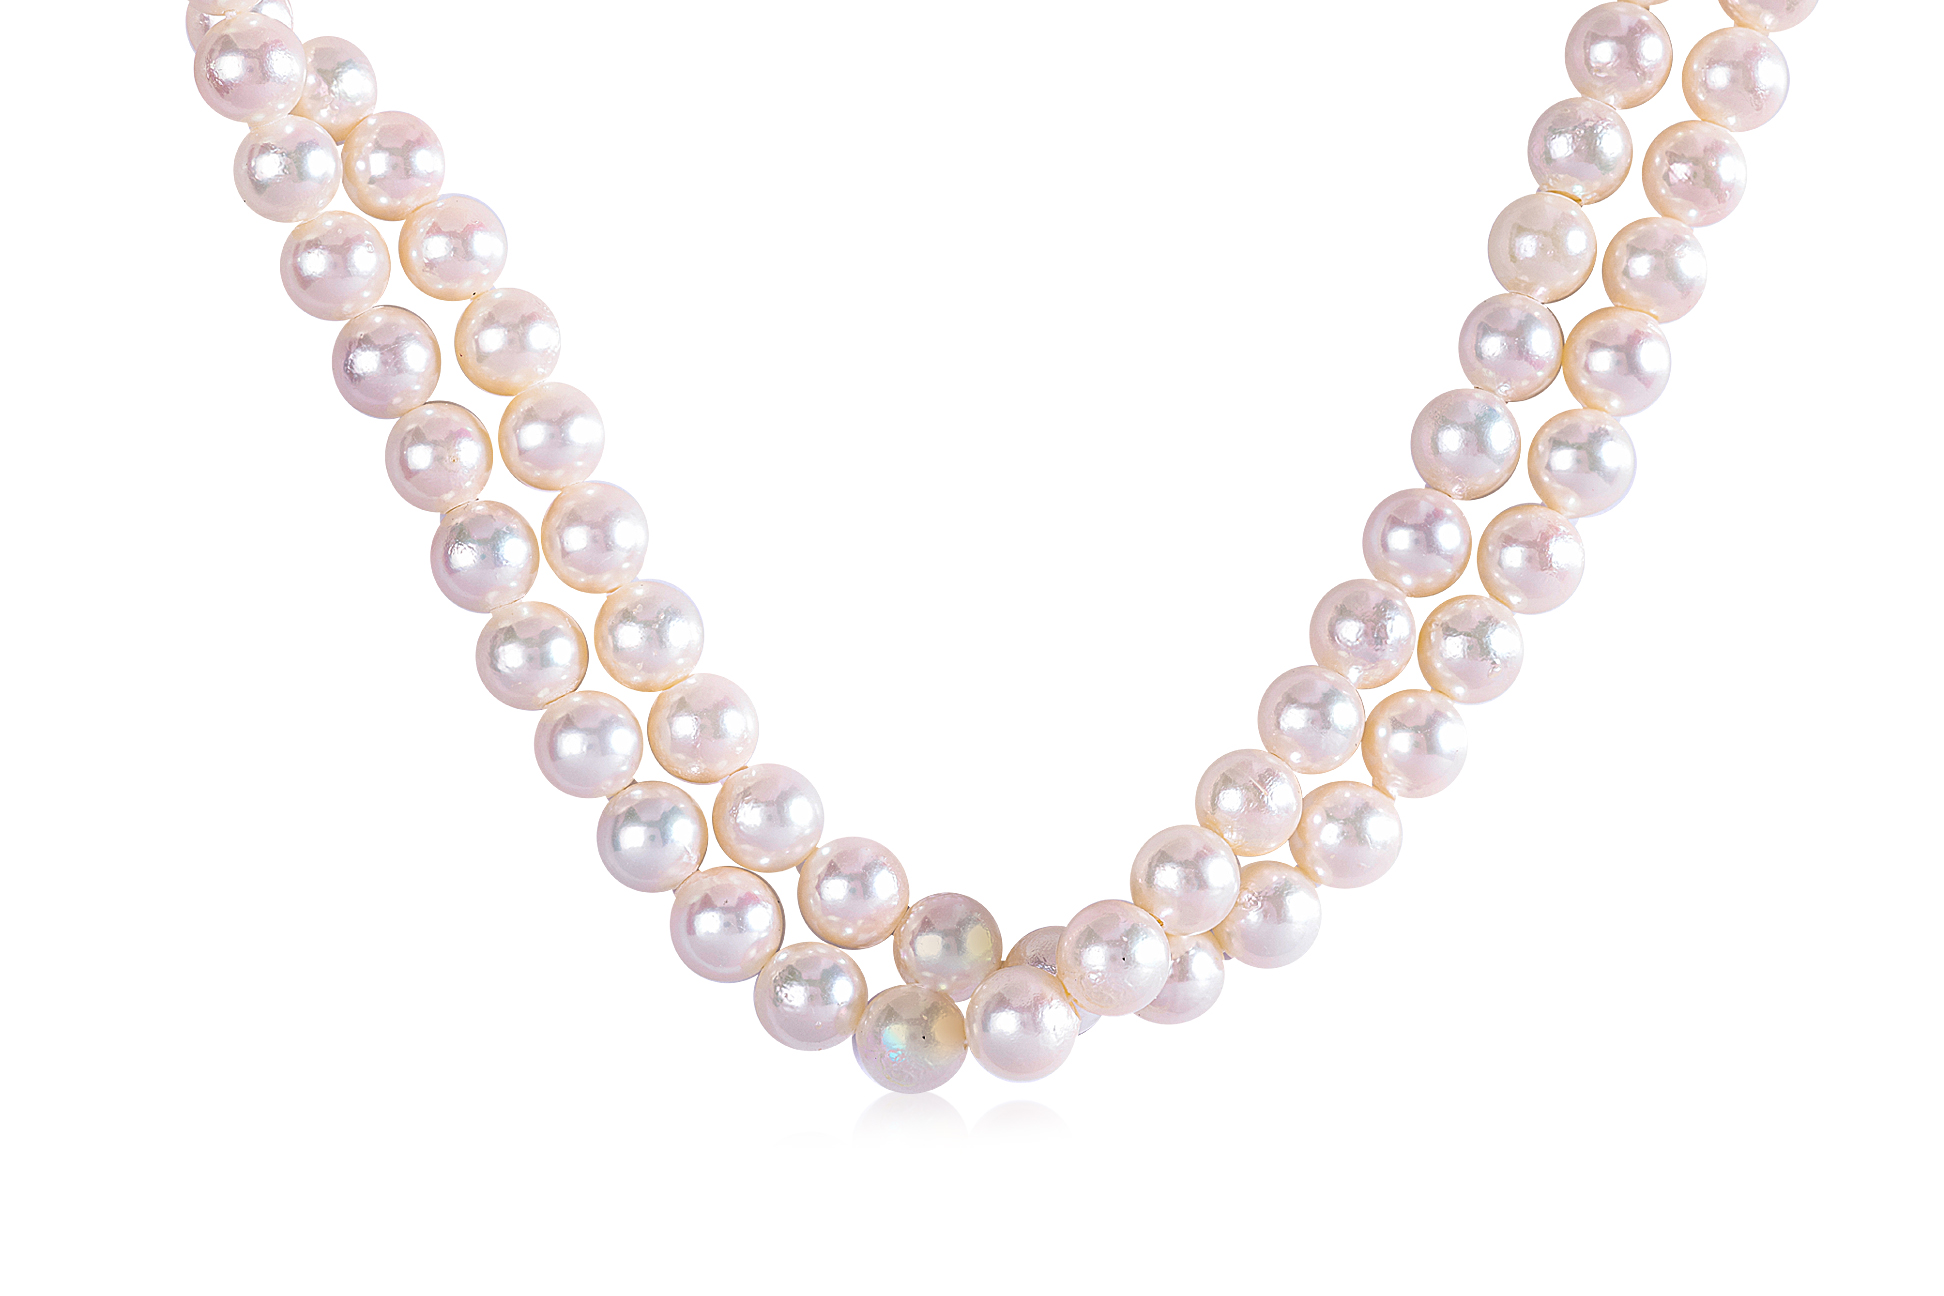 A DOUBLE STRAND AKOYA CULTURED PEARL NECKLACE - Image 2 of 3